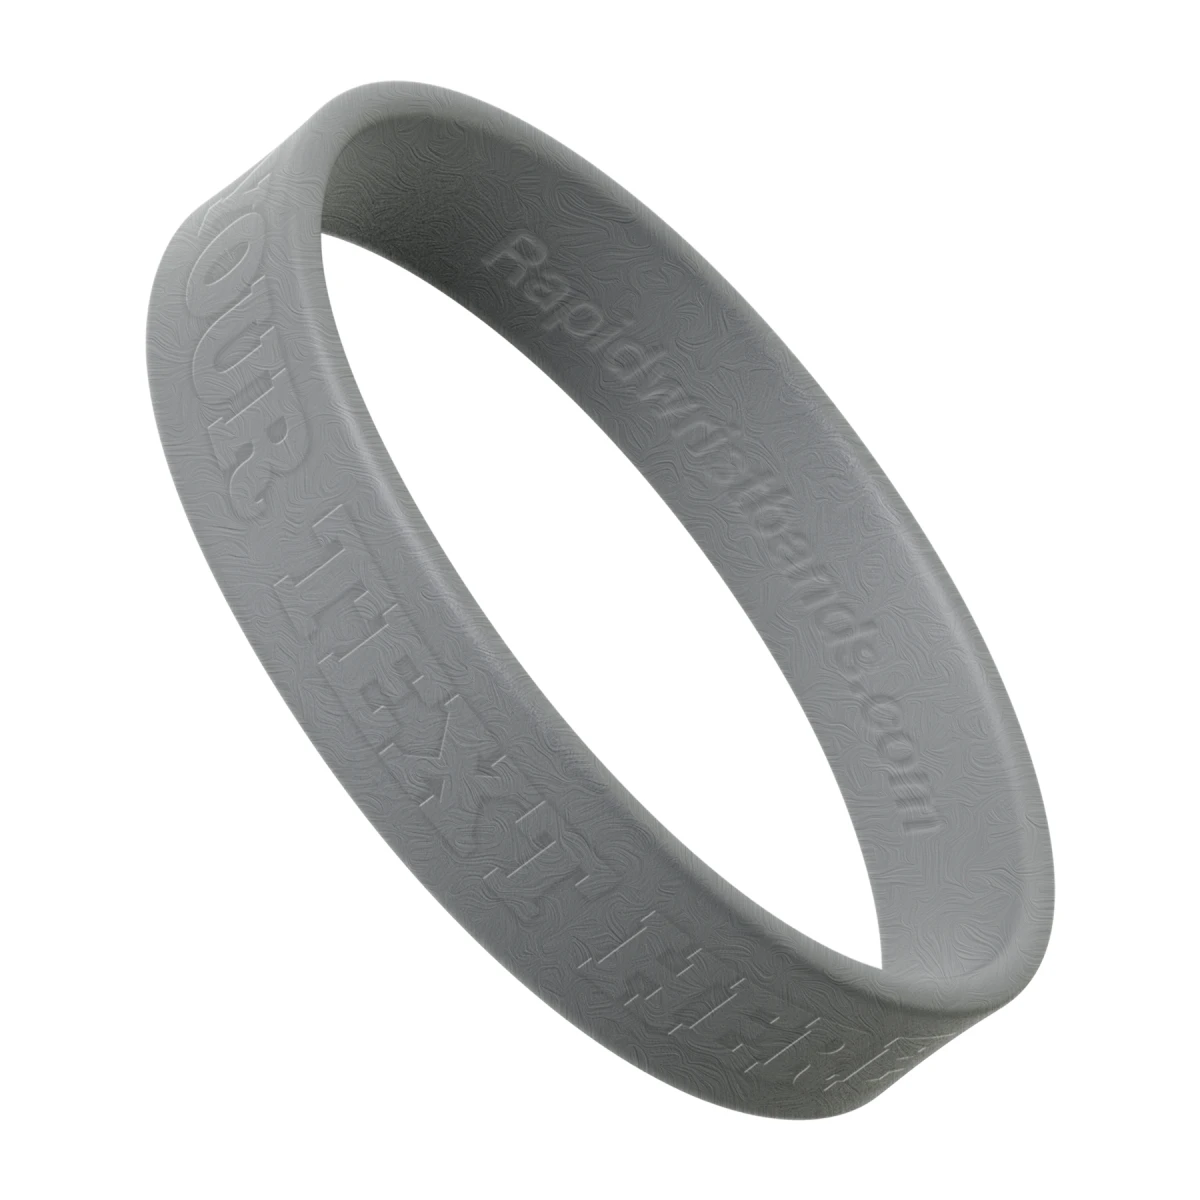 Metallic Silver Wristband With Your Text Here Embossed